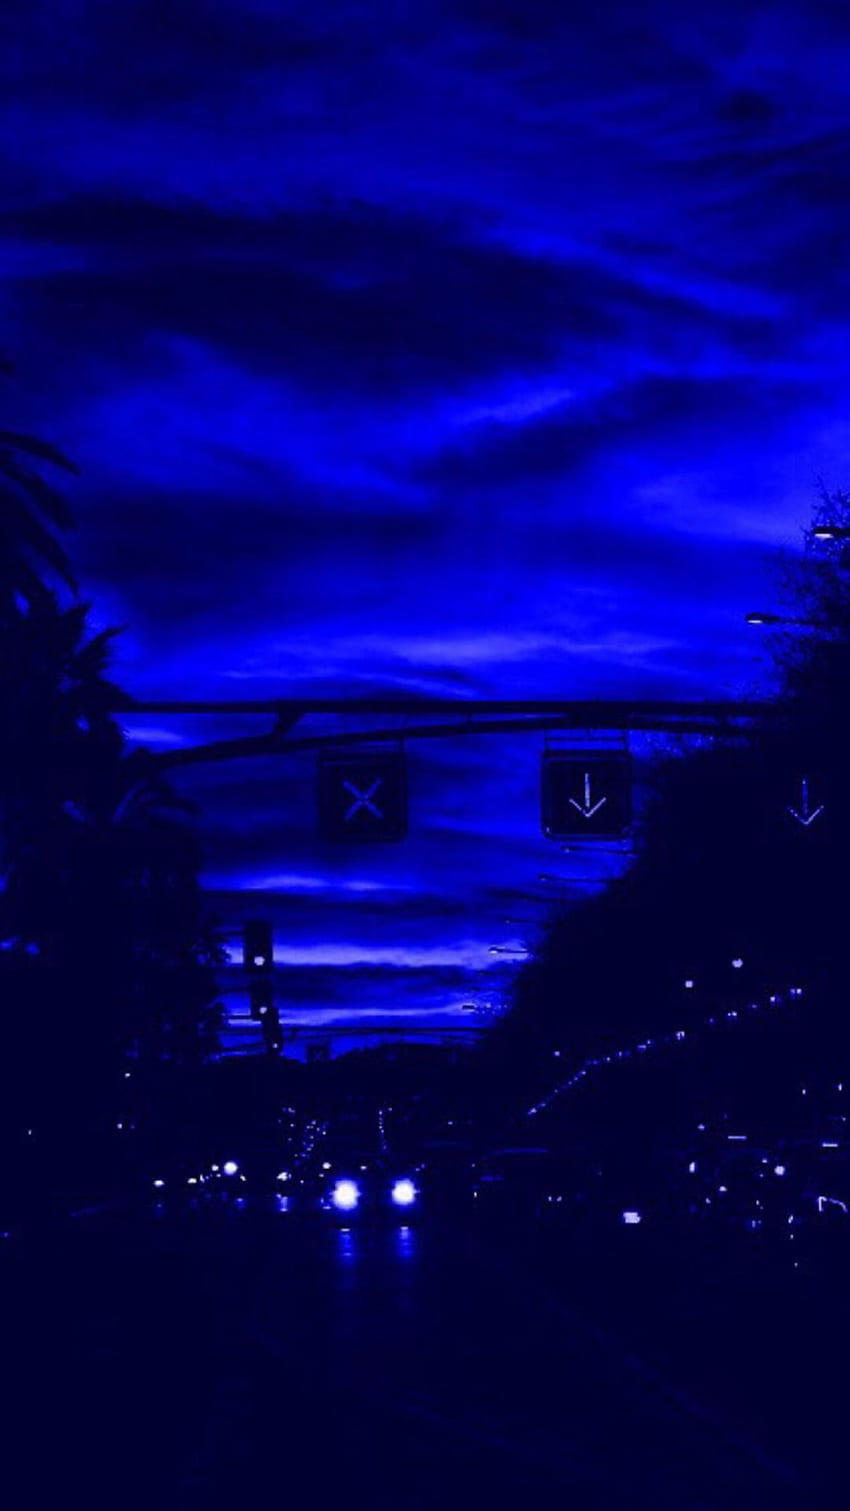 A blue sky with clouds and street lights - Dark blue